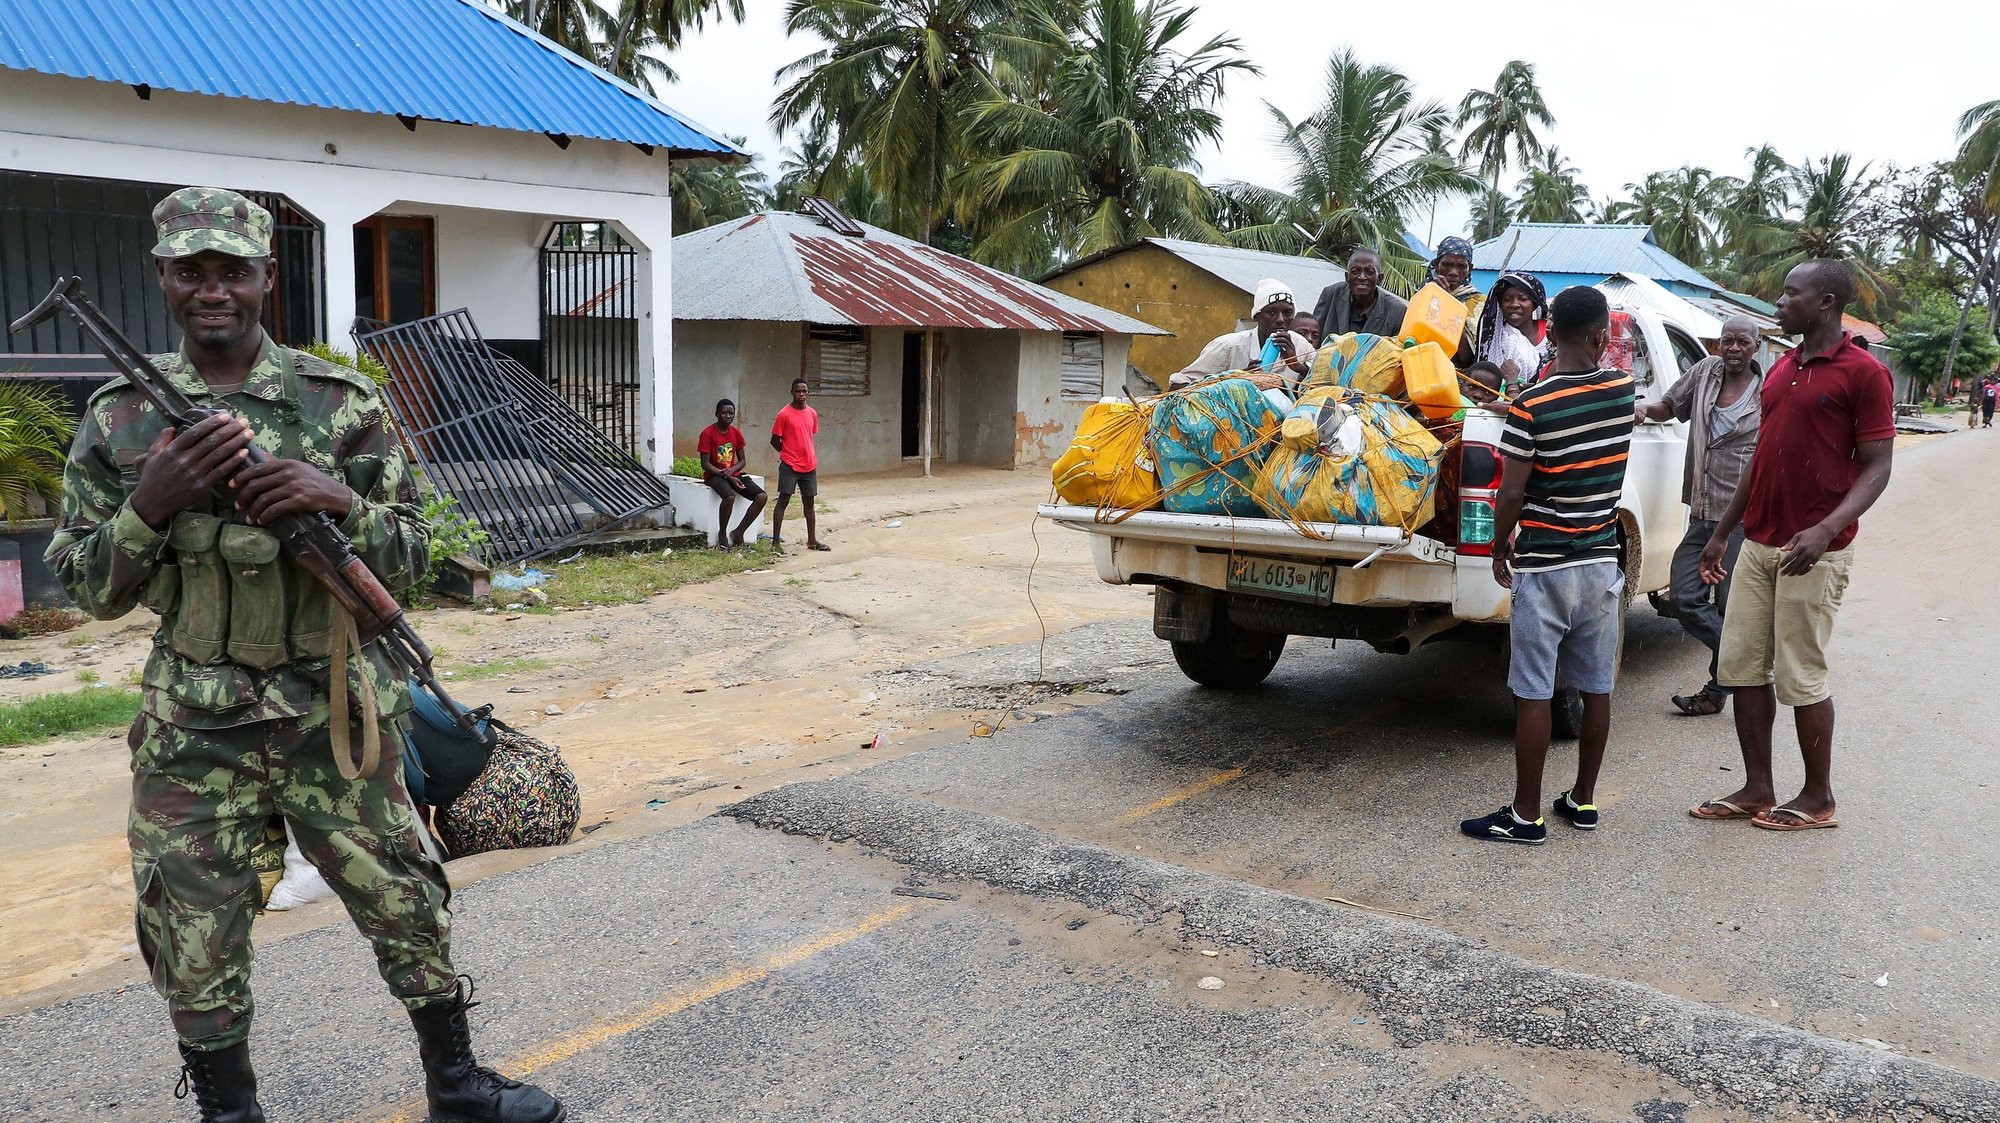 Residents try to return to normality in Palma., Cabo Delgado, Mozambique, 12 April 2021. The violence unleashed more than three years ago in Cabo Delgado province escalated again about two weeks ago, when armed groups first attacked the town of Palma. JOAO RELVAS/LUSA